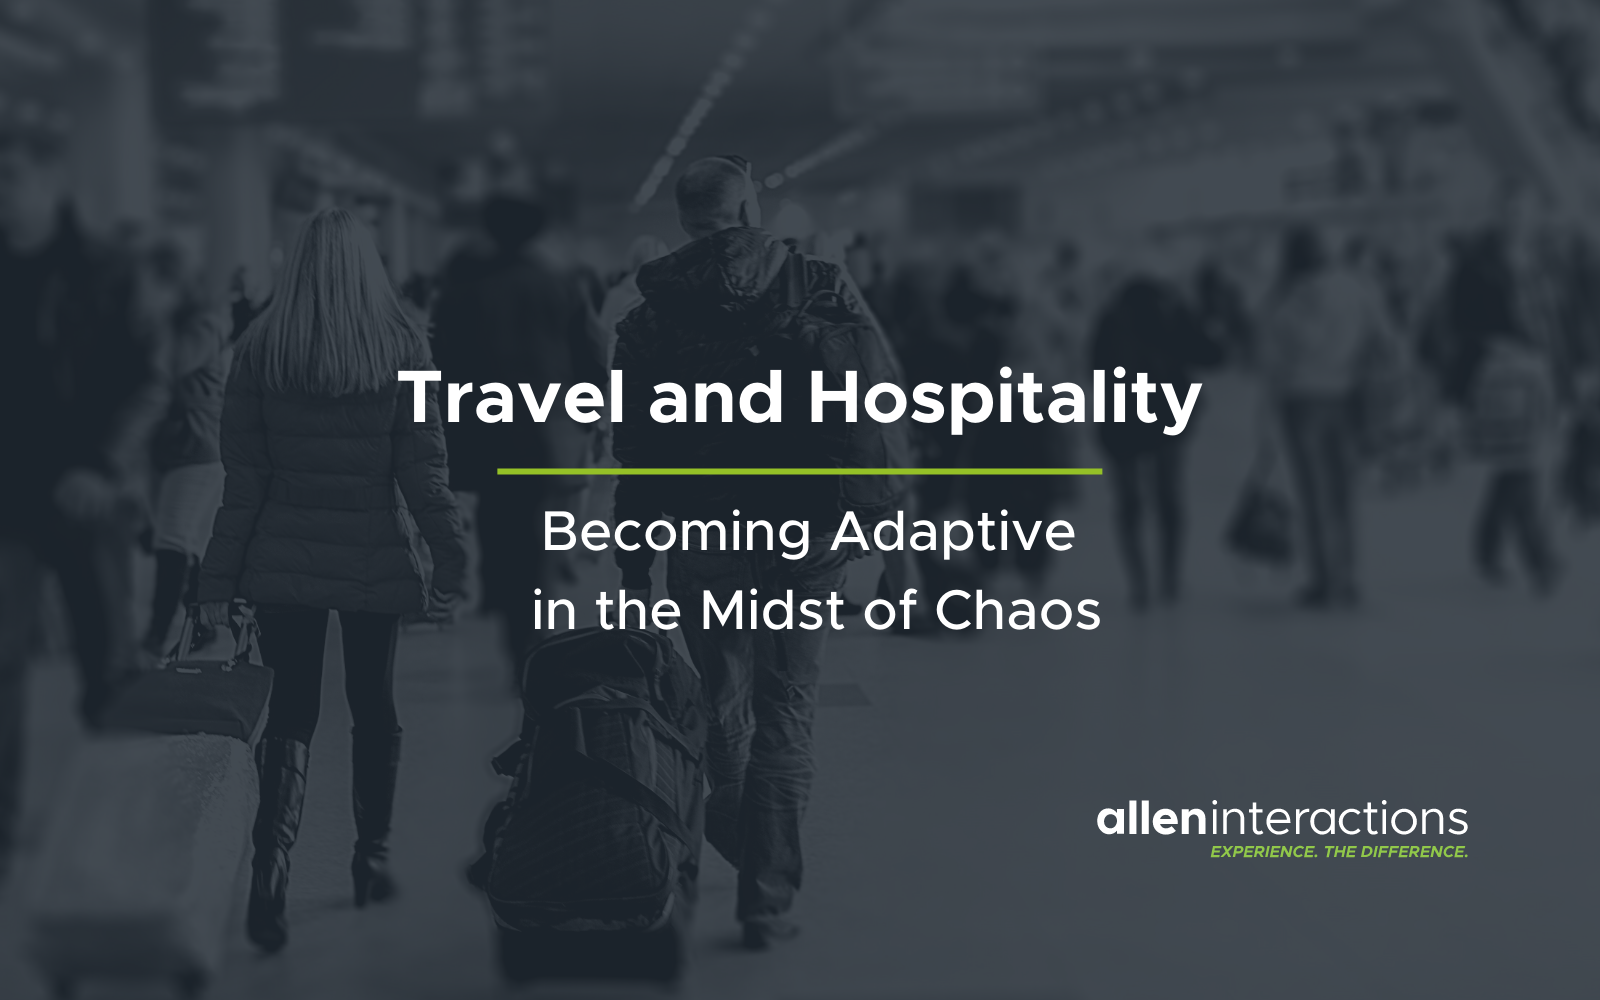 Travel and Hospitality: Becoming Adaptive in the Midst of Chaos